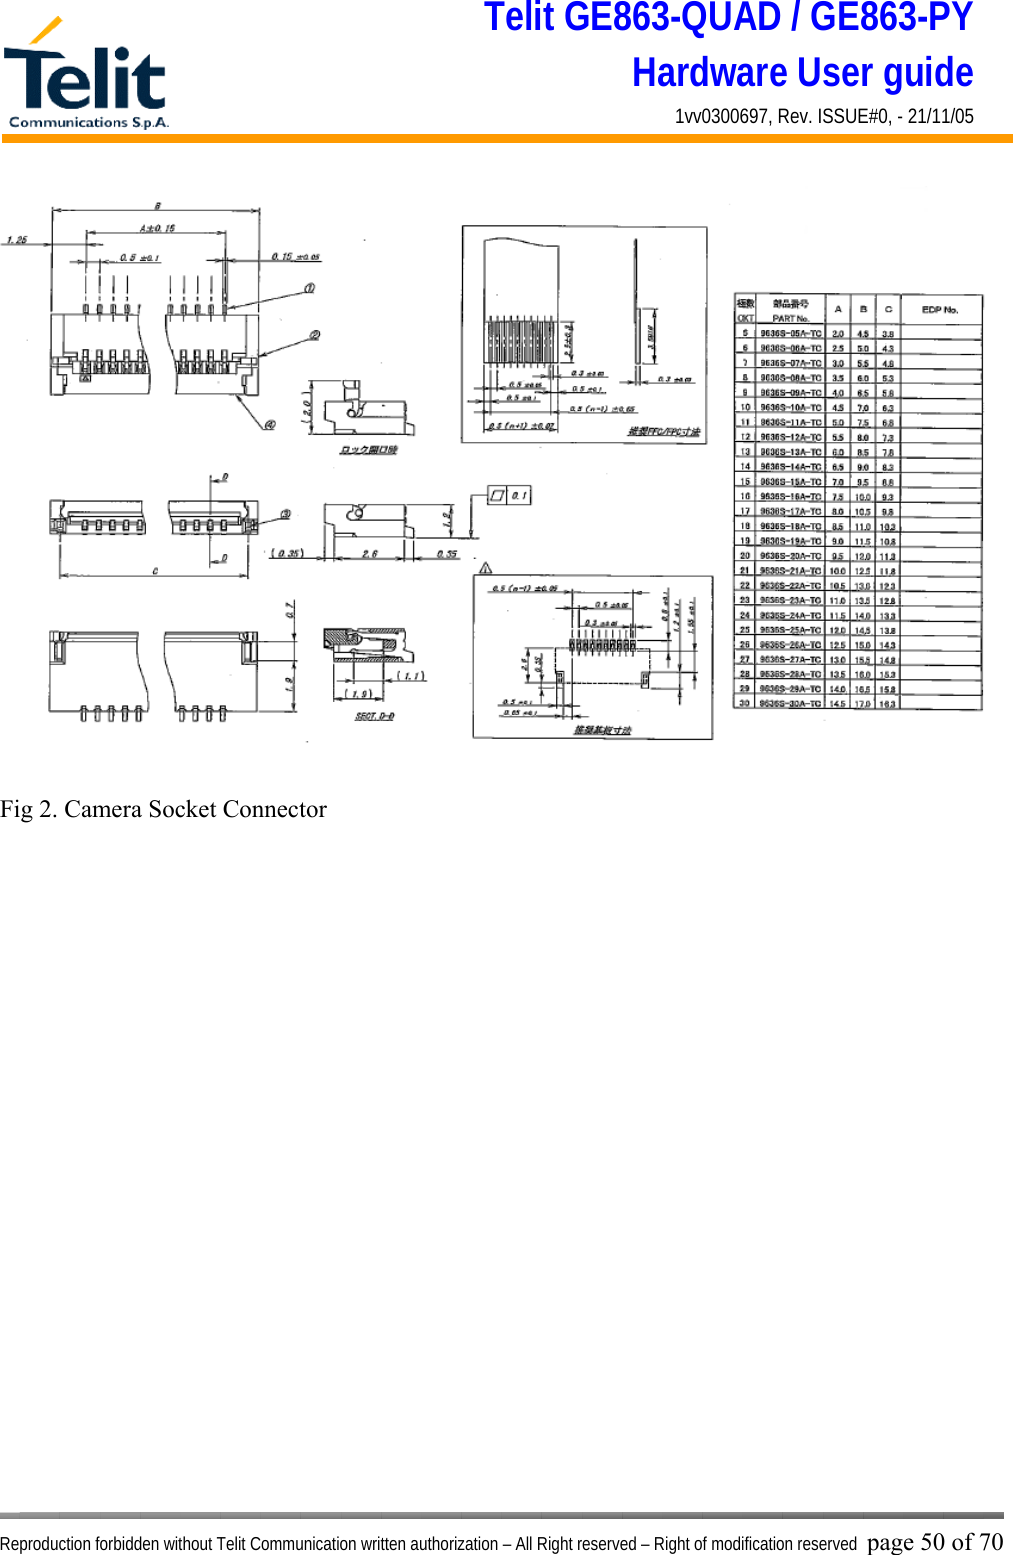 Telit GE863-QUAD / GE863-PY Hardware User guide 1vv0300697, Rev. ISSUE#0, - 21/11/05    Reproduction forbidden without Telit Communication written authorization – All Right reserved – Right of modification reserved page 50 of 70                 Fig 2. Camera Socket Connector 